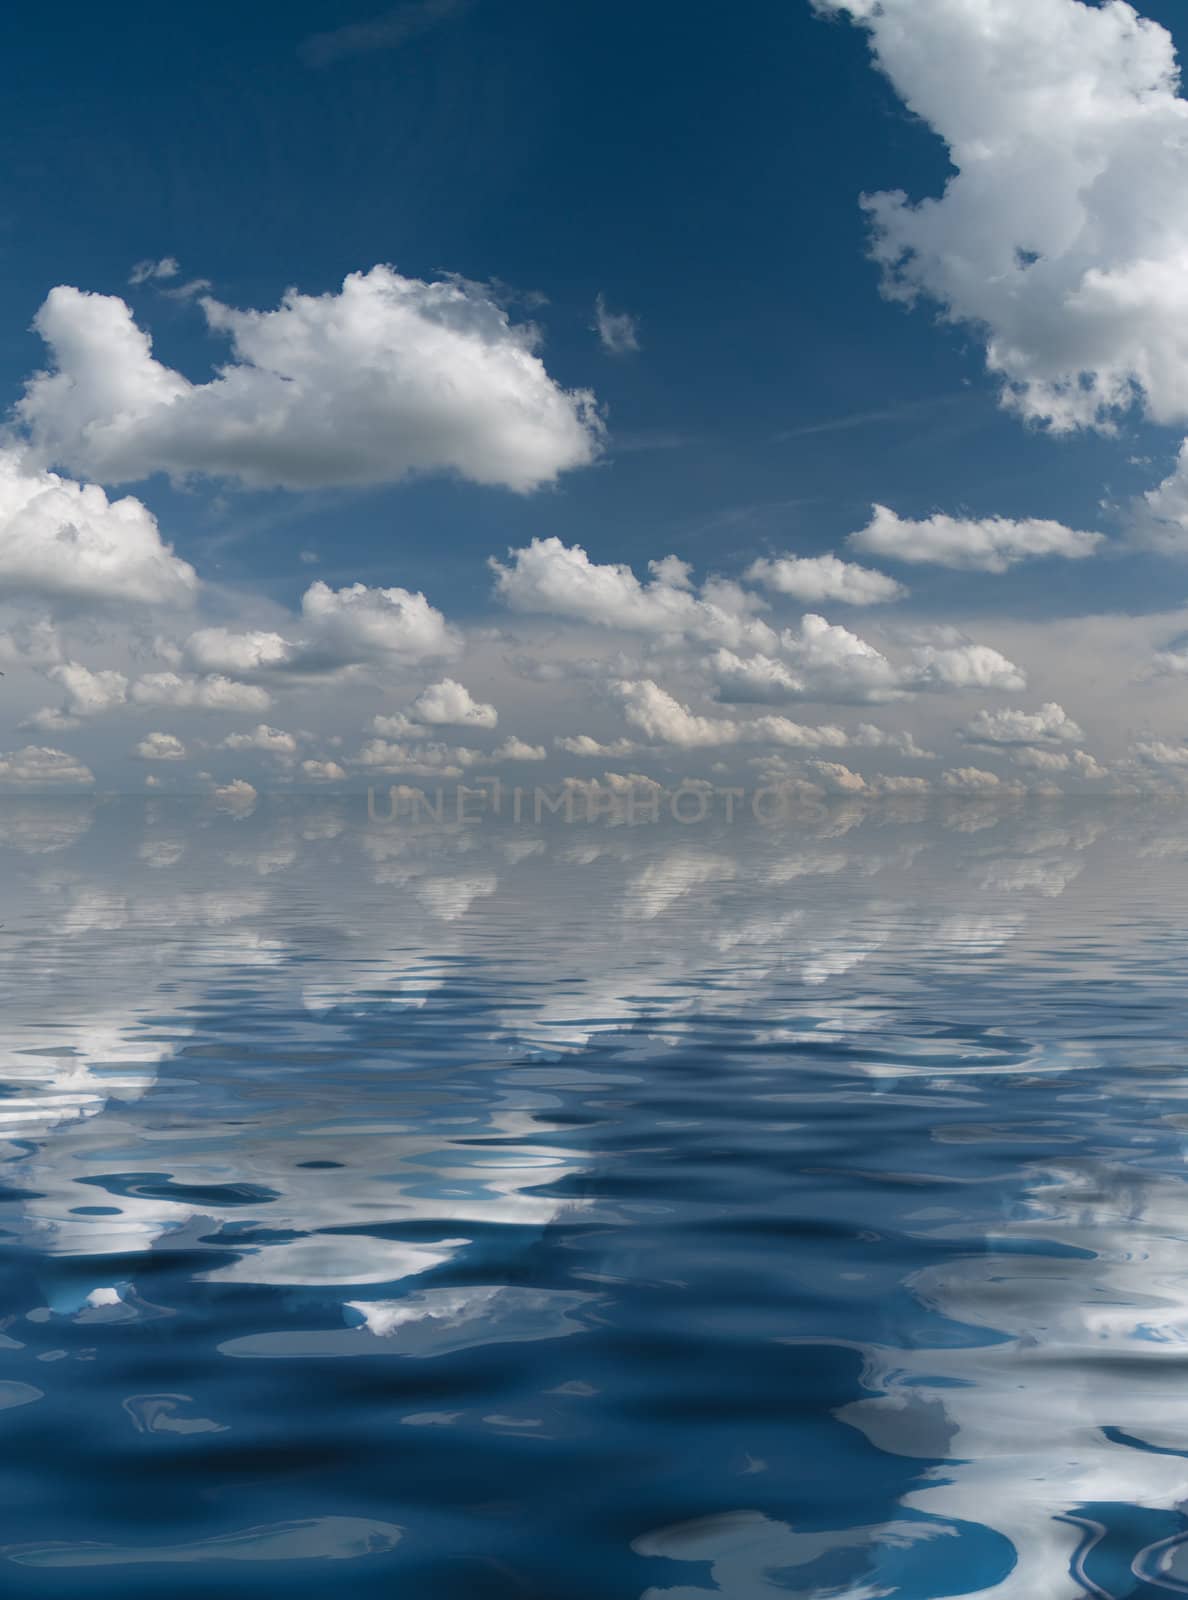 White clouds on a clear blue sky mirrored in rippled water